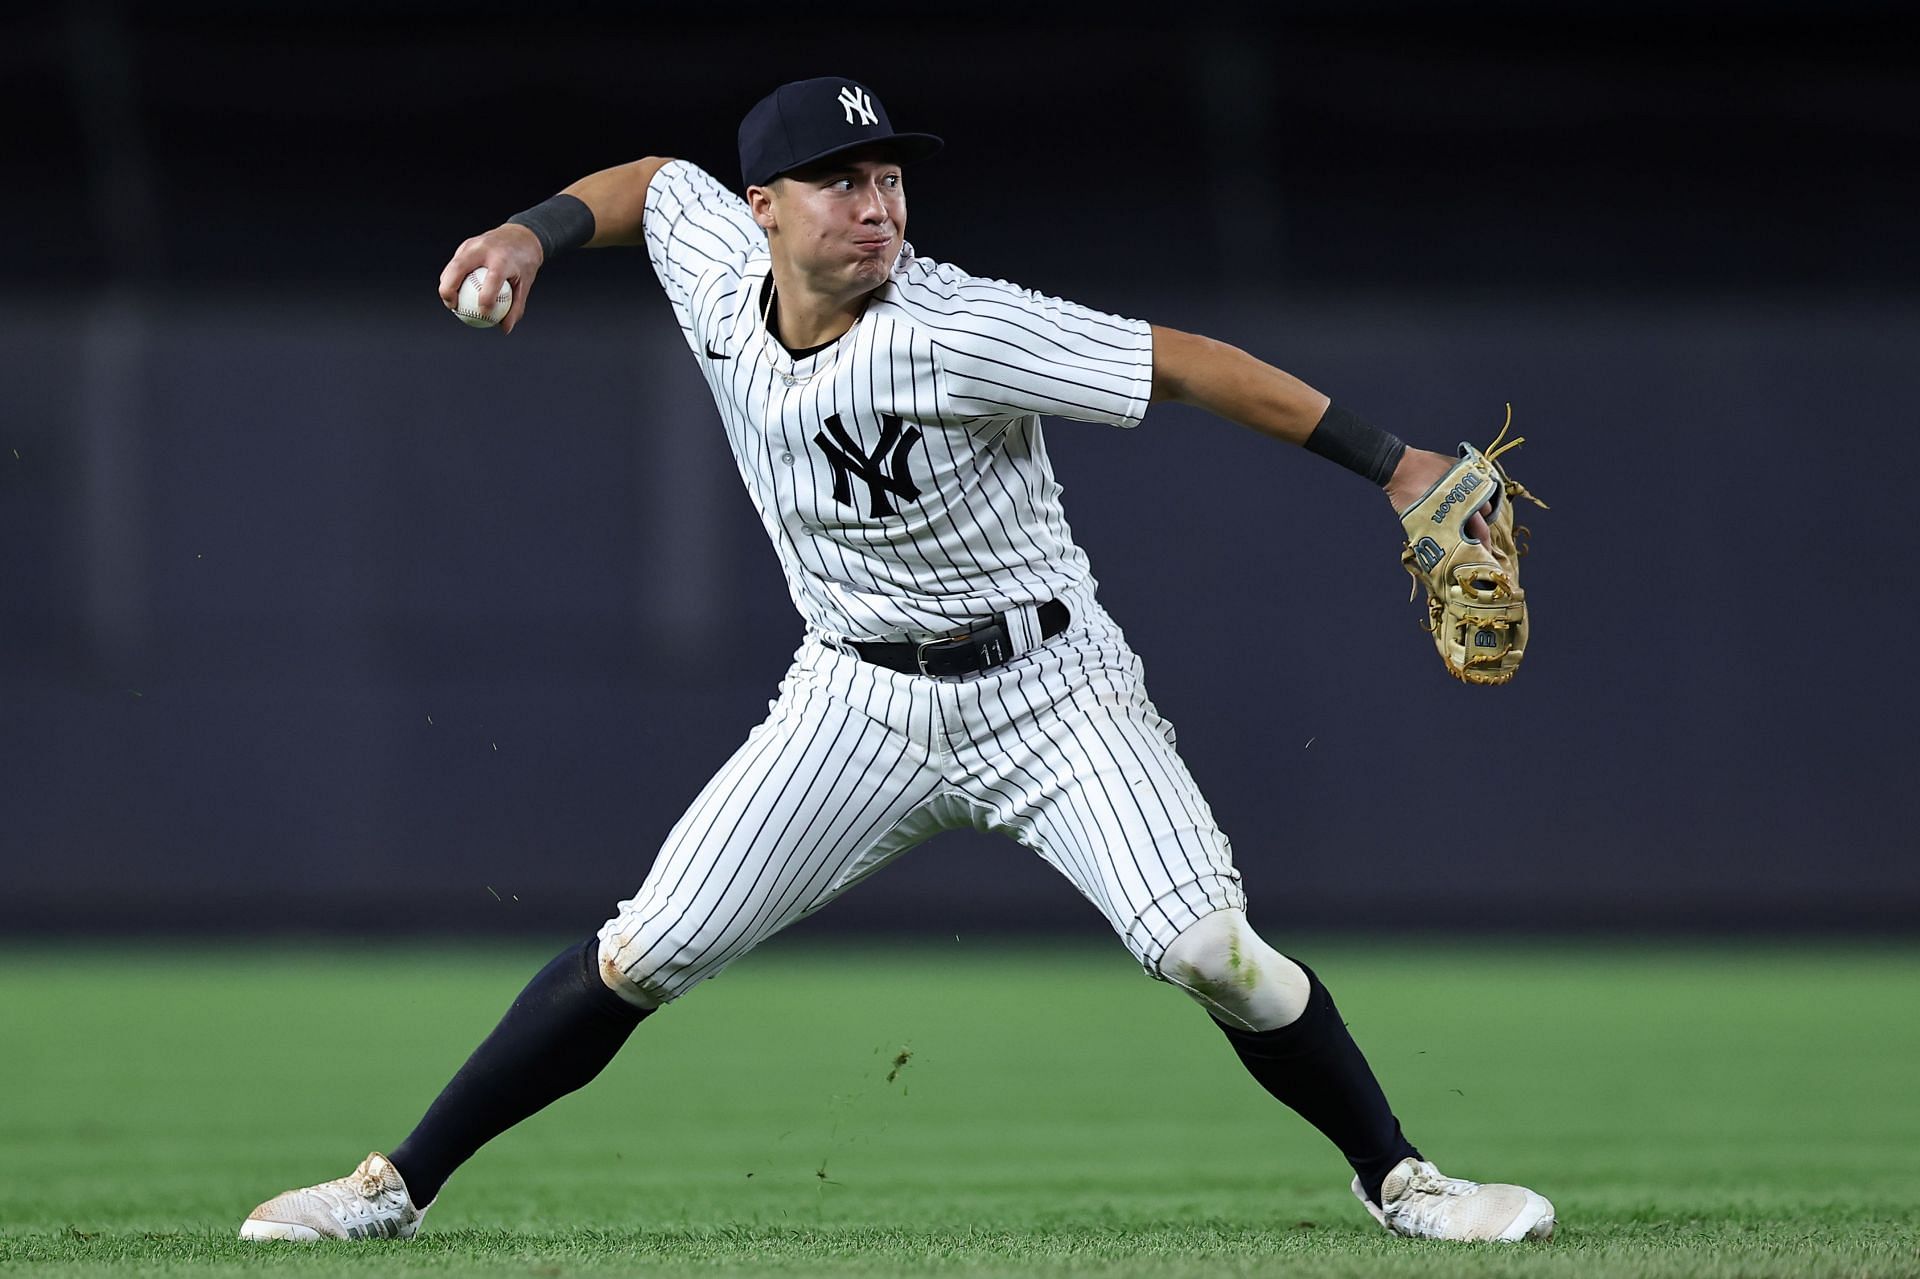 Could the Yankees MLB Draft see a shortstop picked?